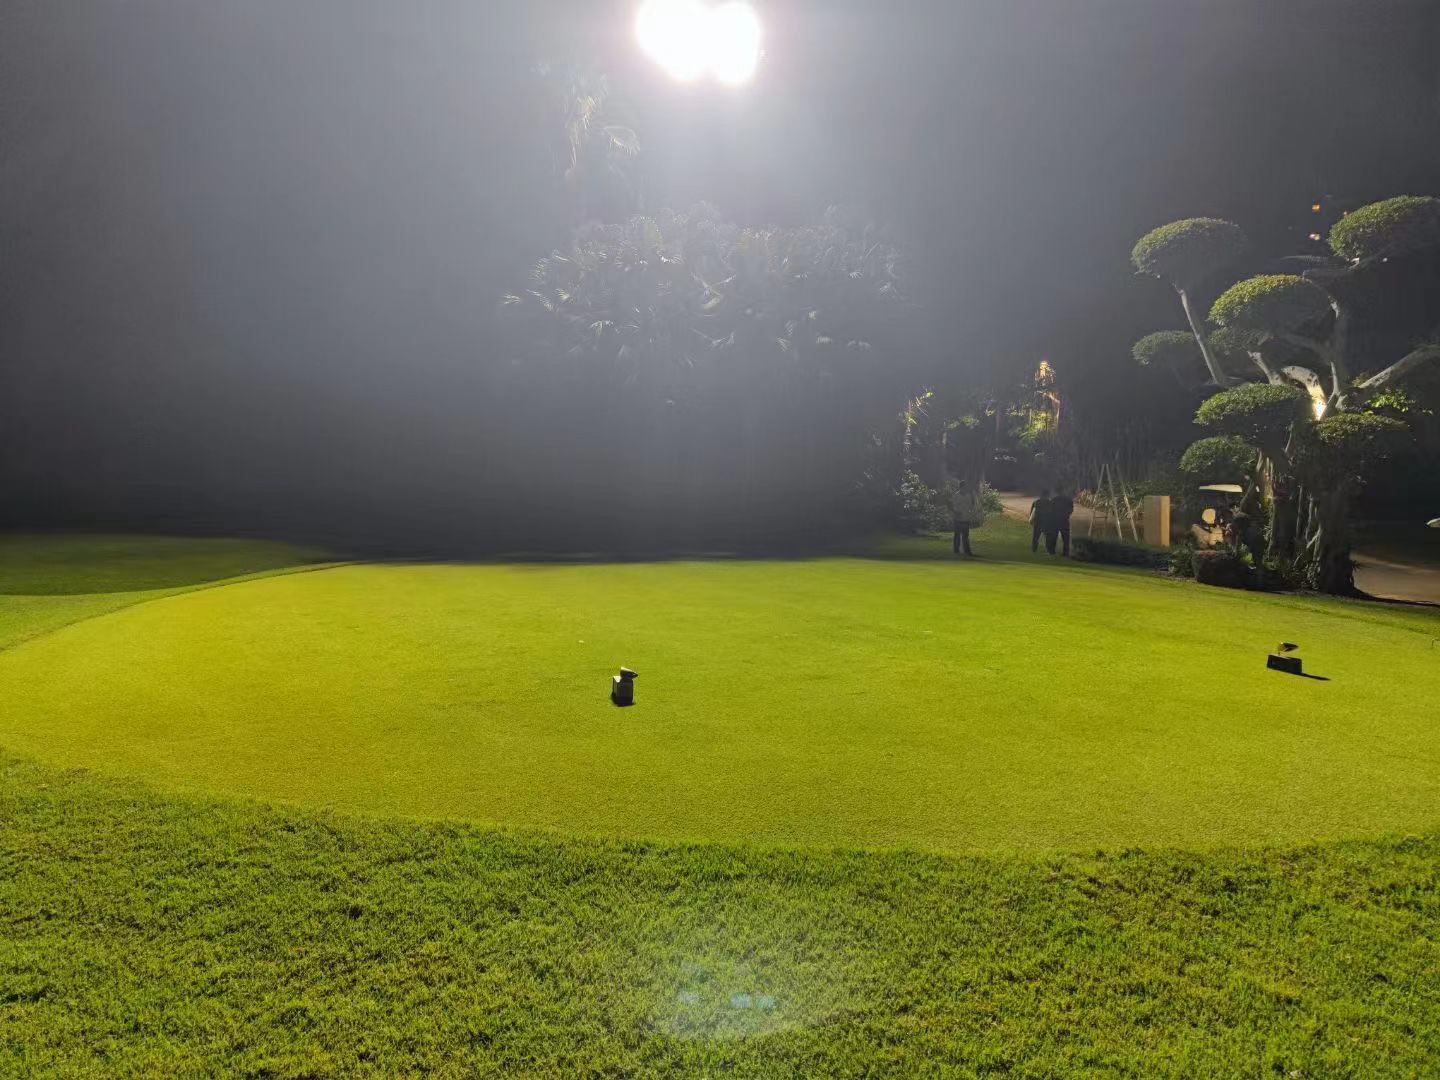 GINLITE LED High Mast Lamp at Shenzhen Golf Course Lighting Project.